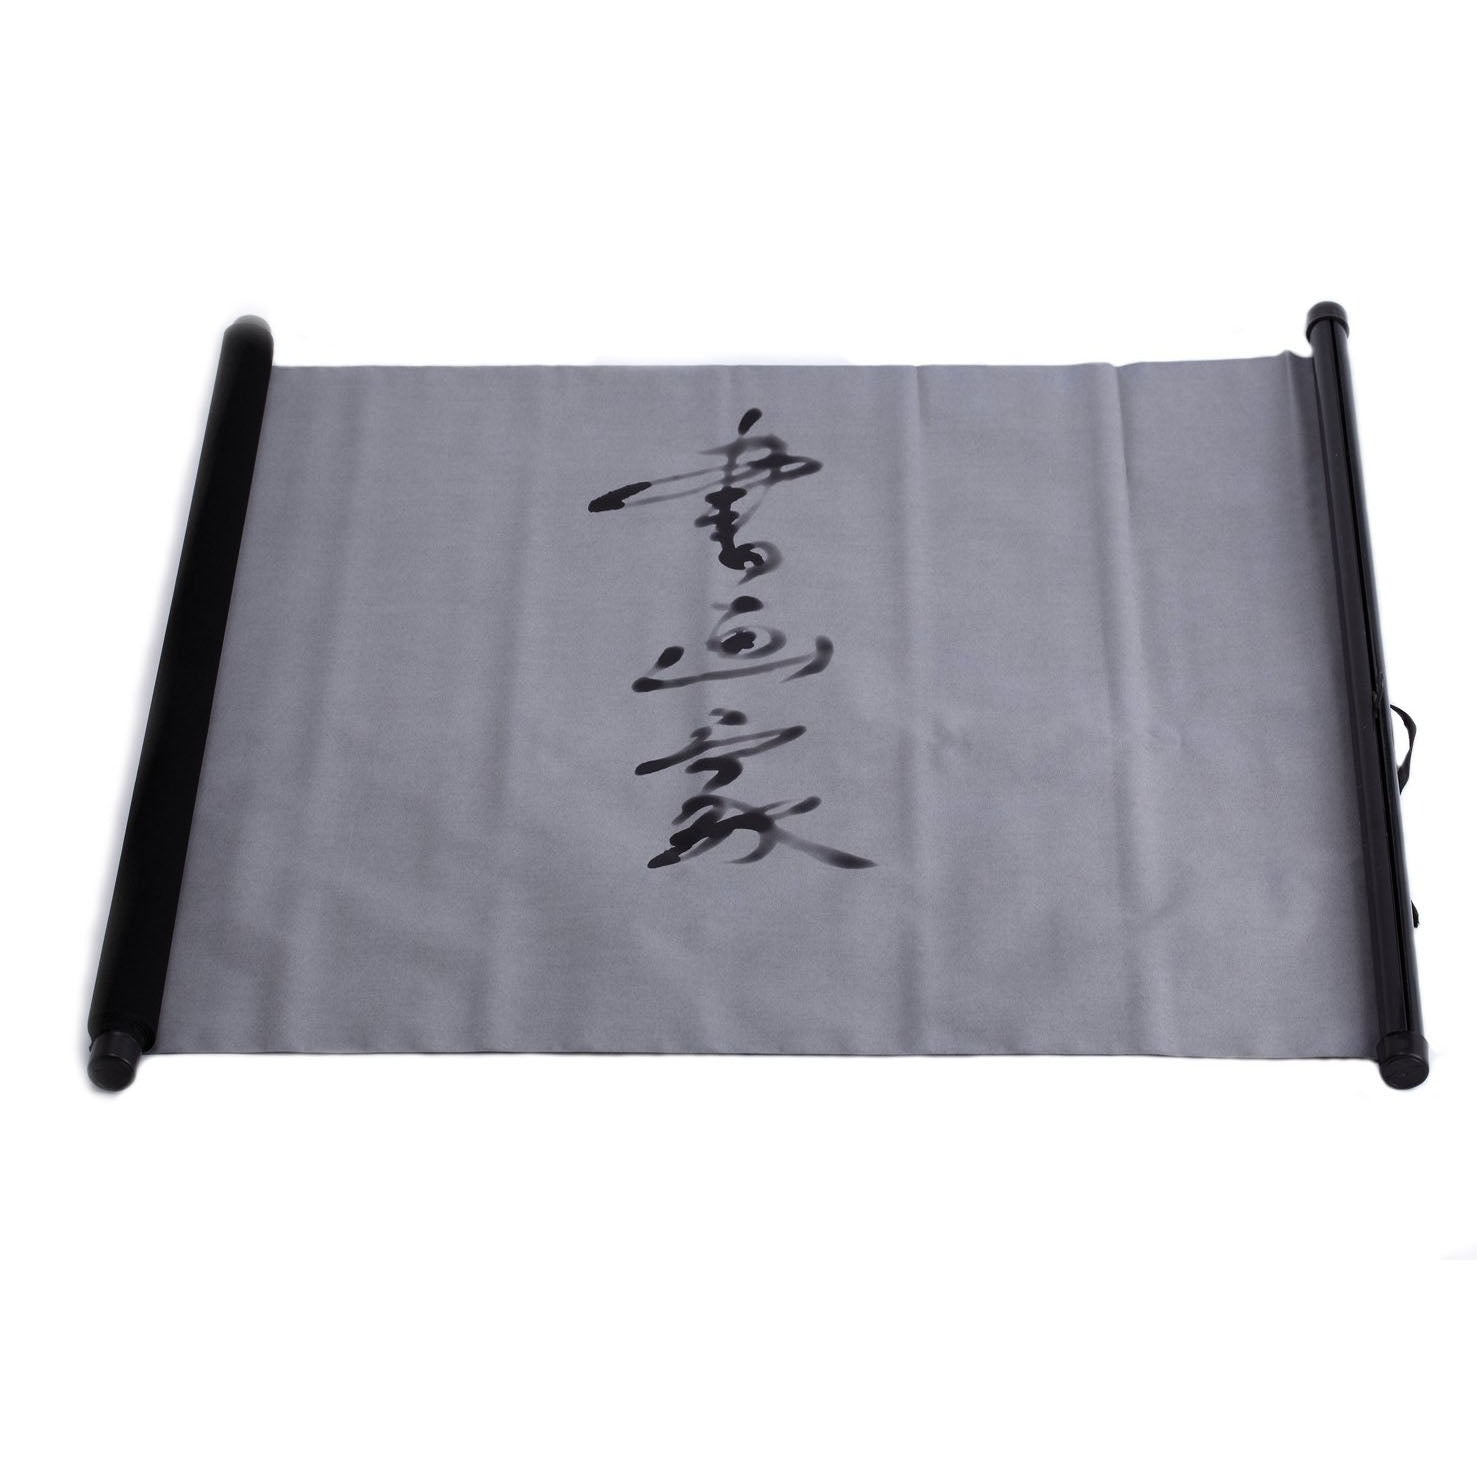 Chinese Calligraphy Paper Retro Style Art Handwriting Paper Drawing Xuan  Rice Paper School Office Supplies(F)